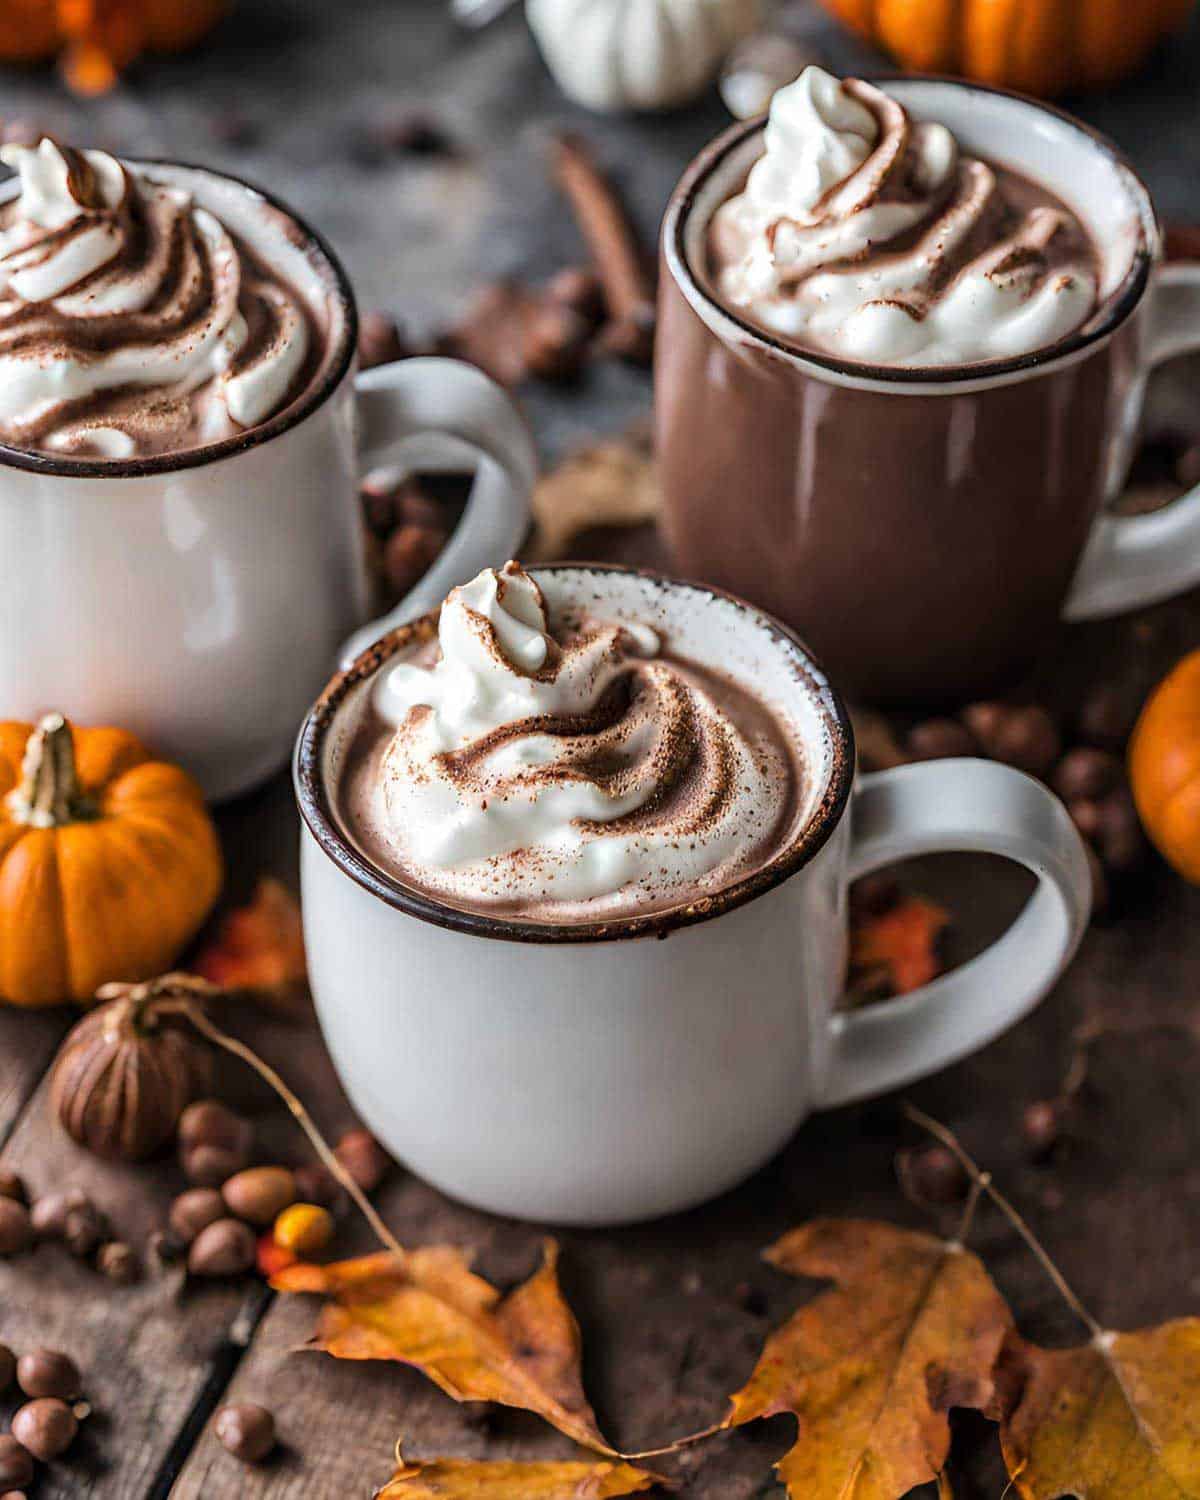 Three mugs of hot chocolate with whipped cream and pumpkins.